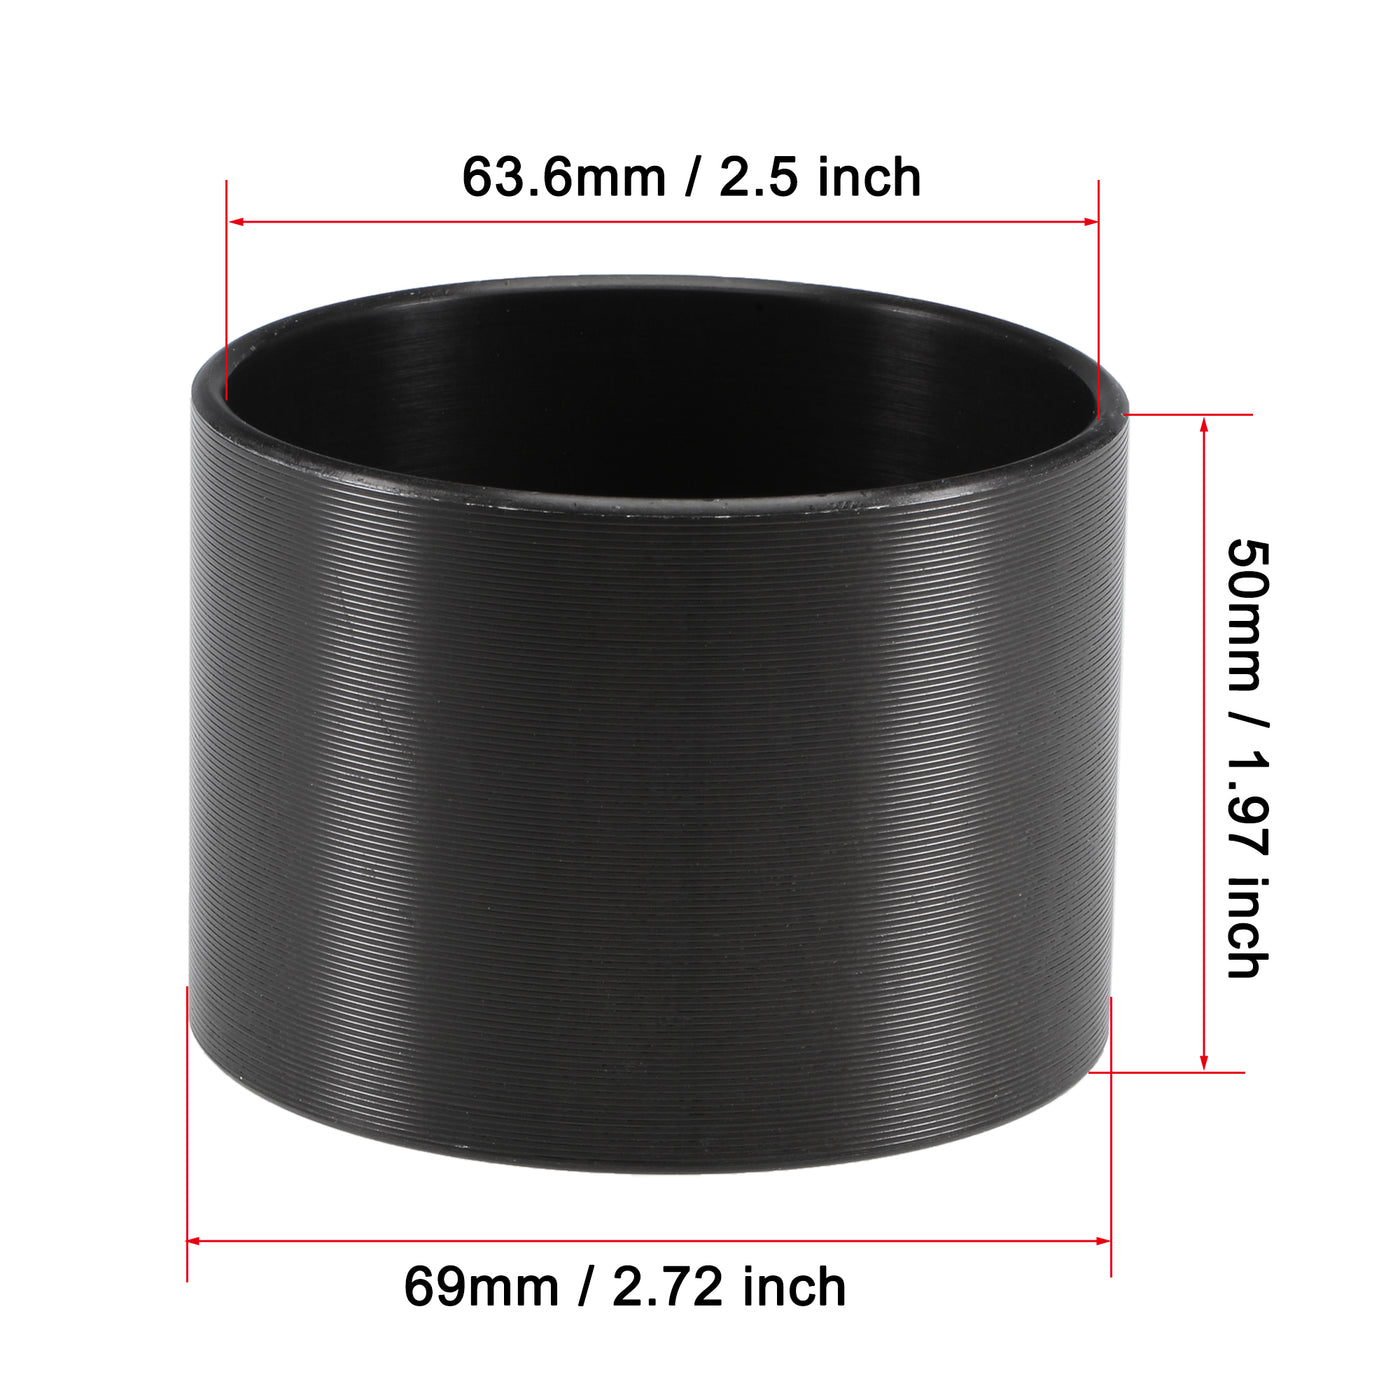 Uxcell Uxcell Piston Ring Compressor Cylinder Sleeve Steel Air Compression Replacement Part, 75mmx69.7mmx47.5mm, Dark Gray